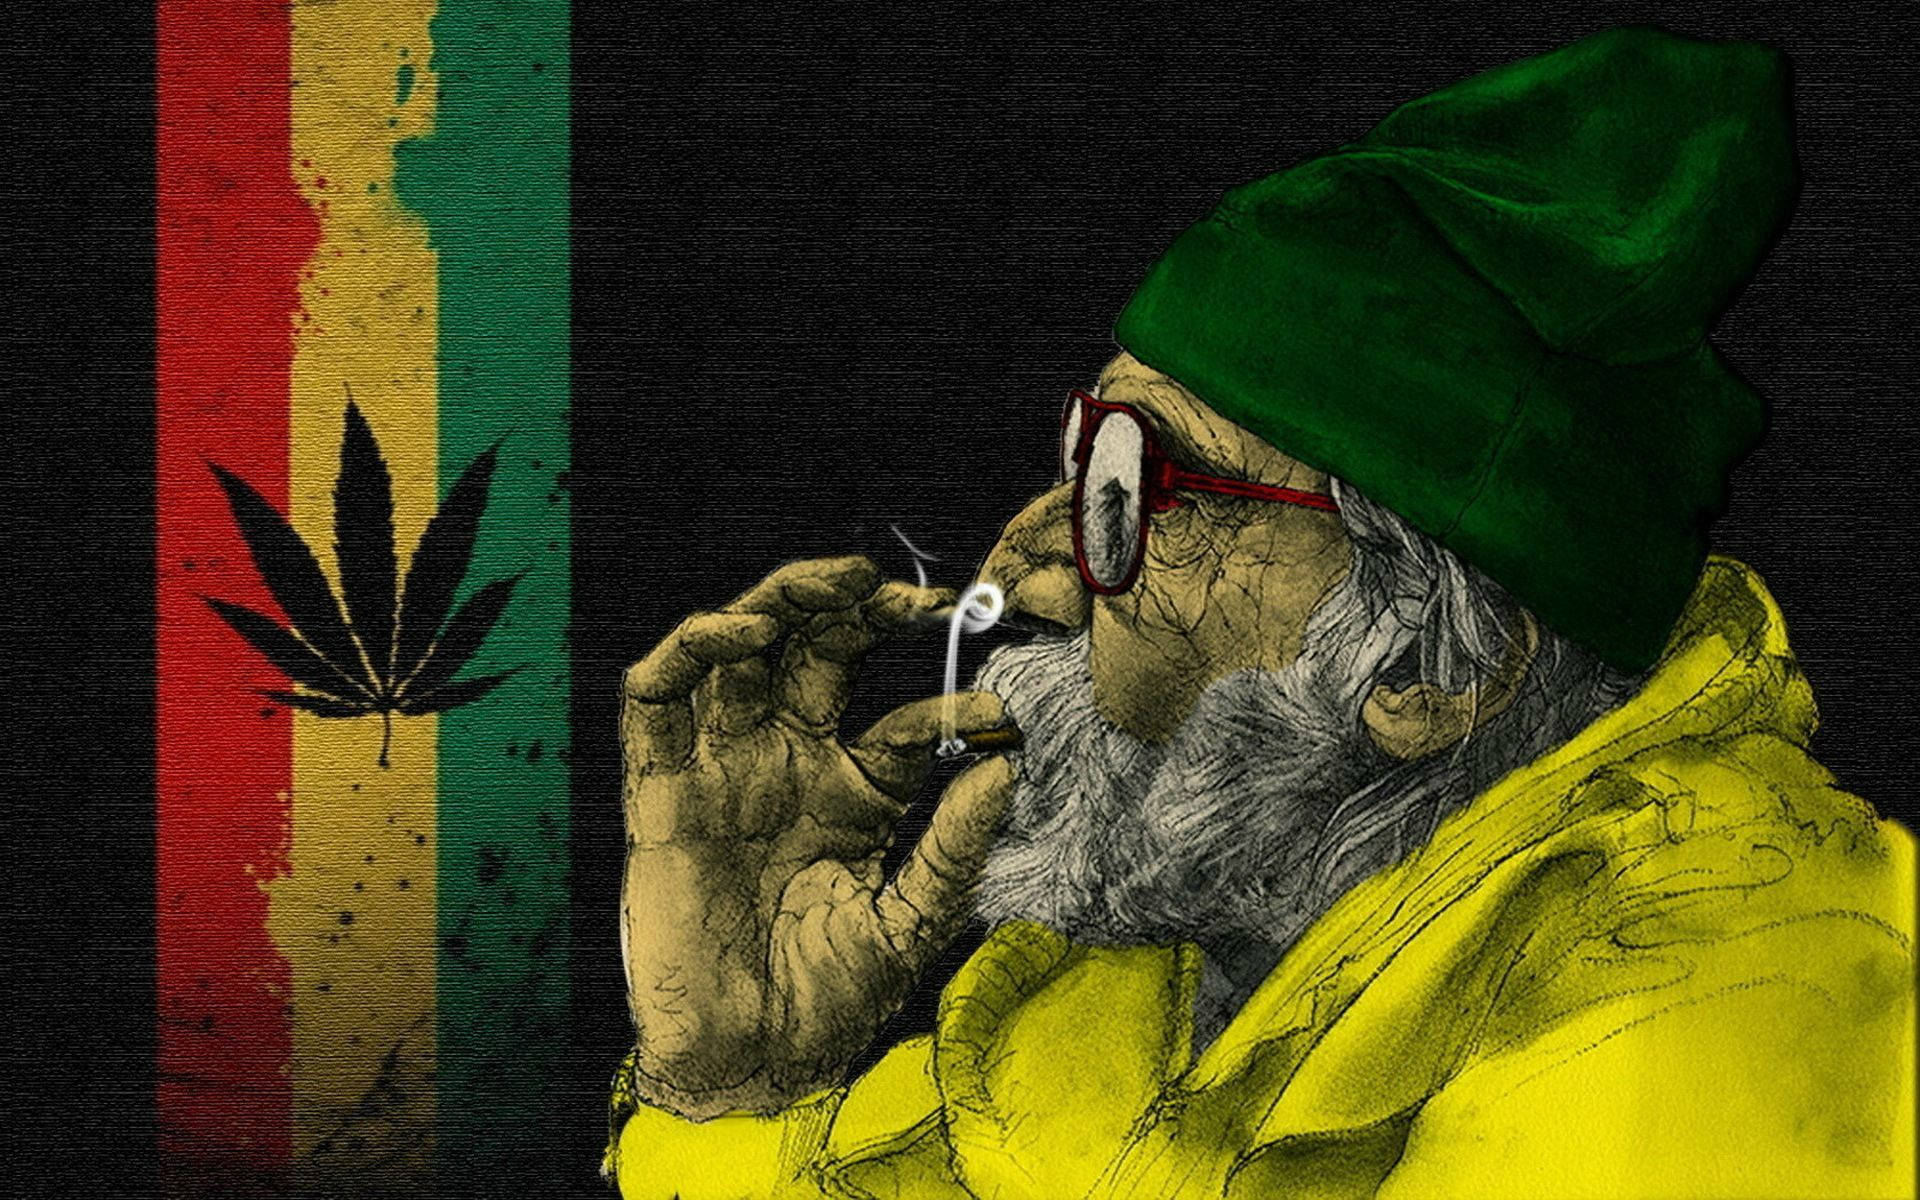 A stoner rasta man lights a joint in front of a rasta flag - Weed